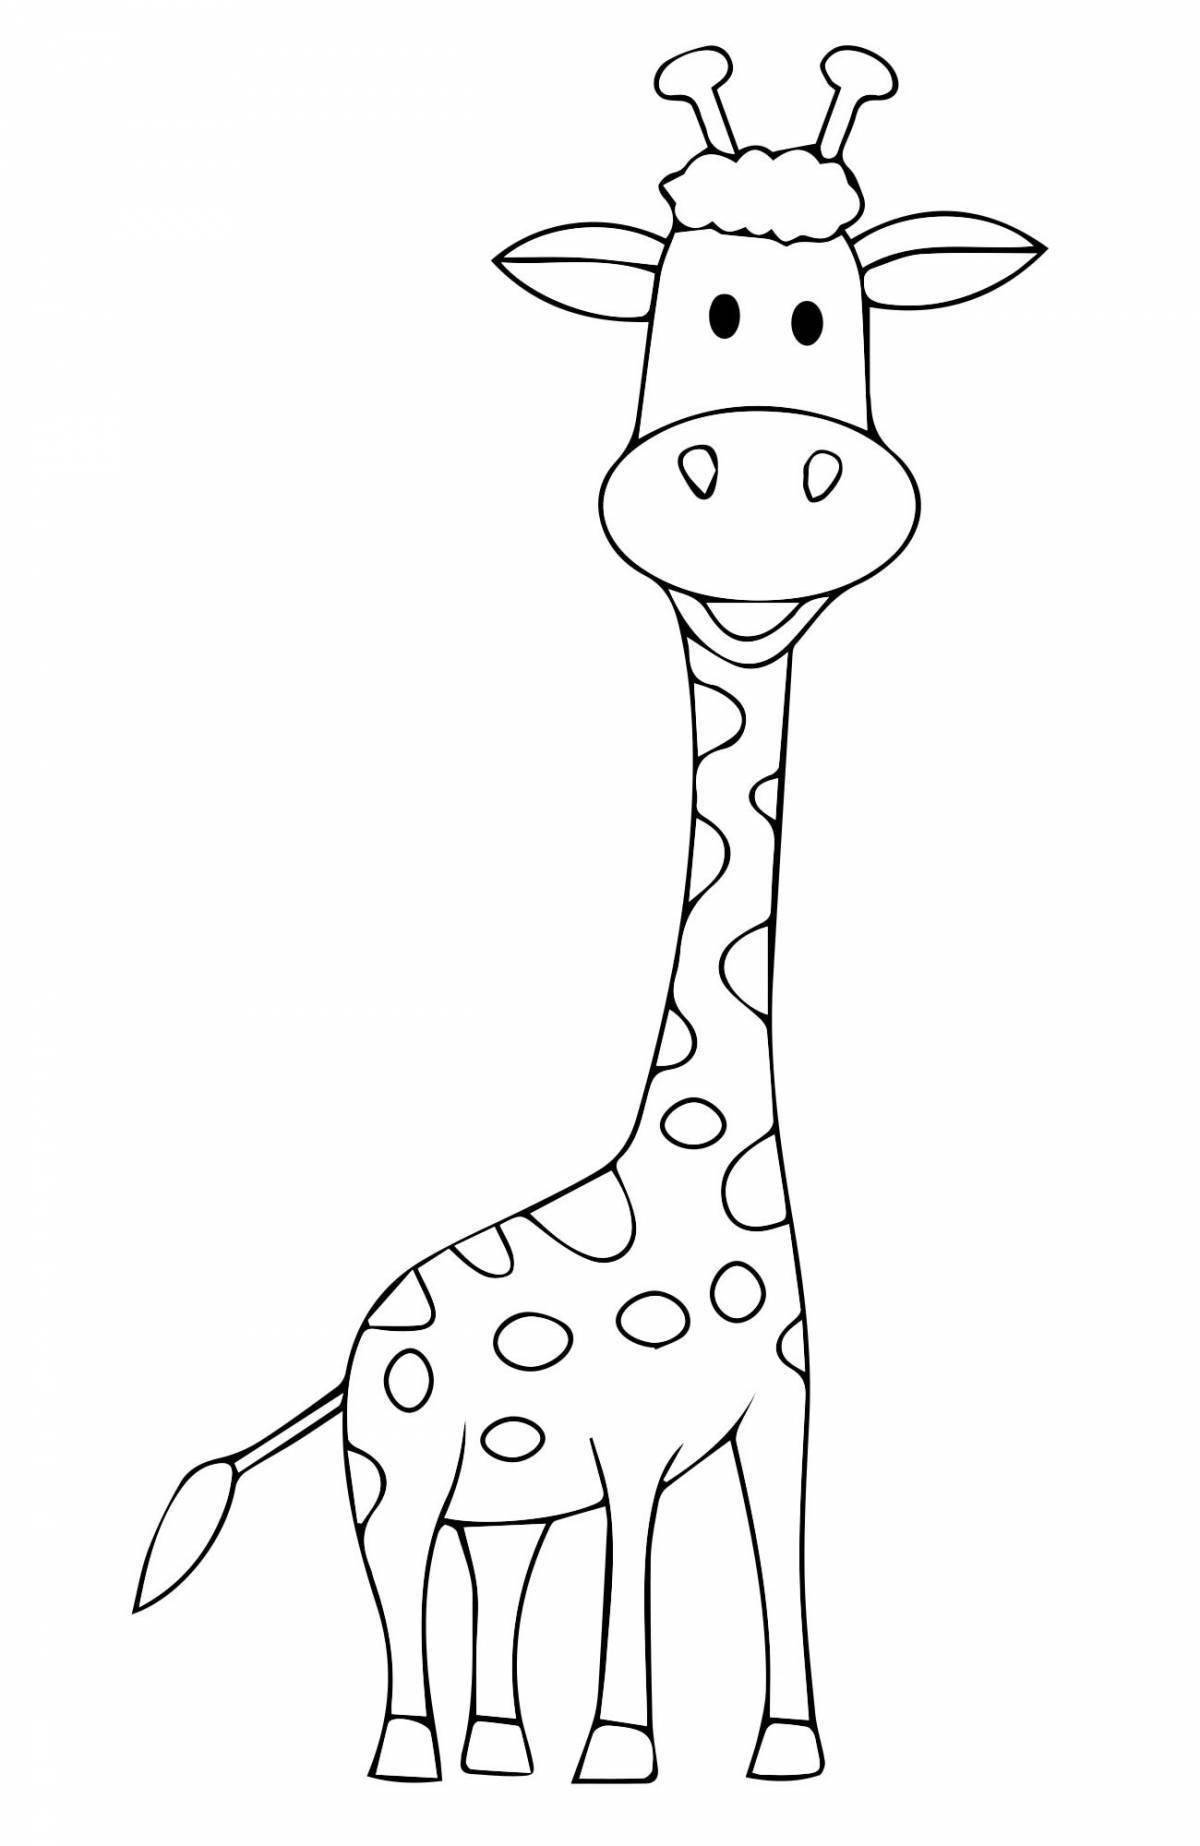 Coloring giraffe for children 3-4 years old